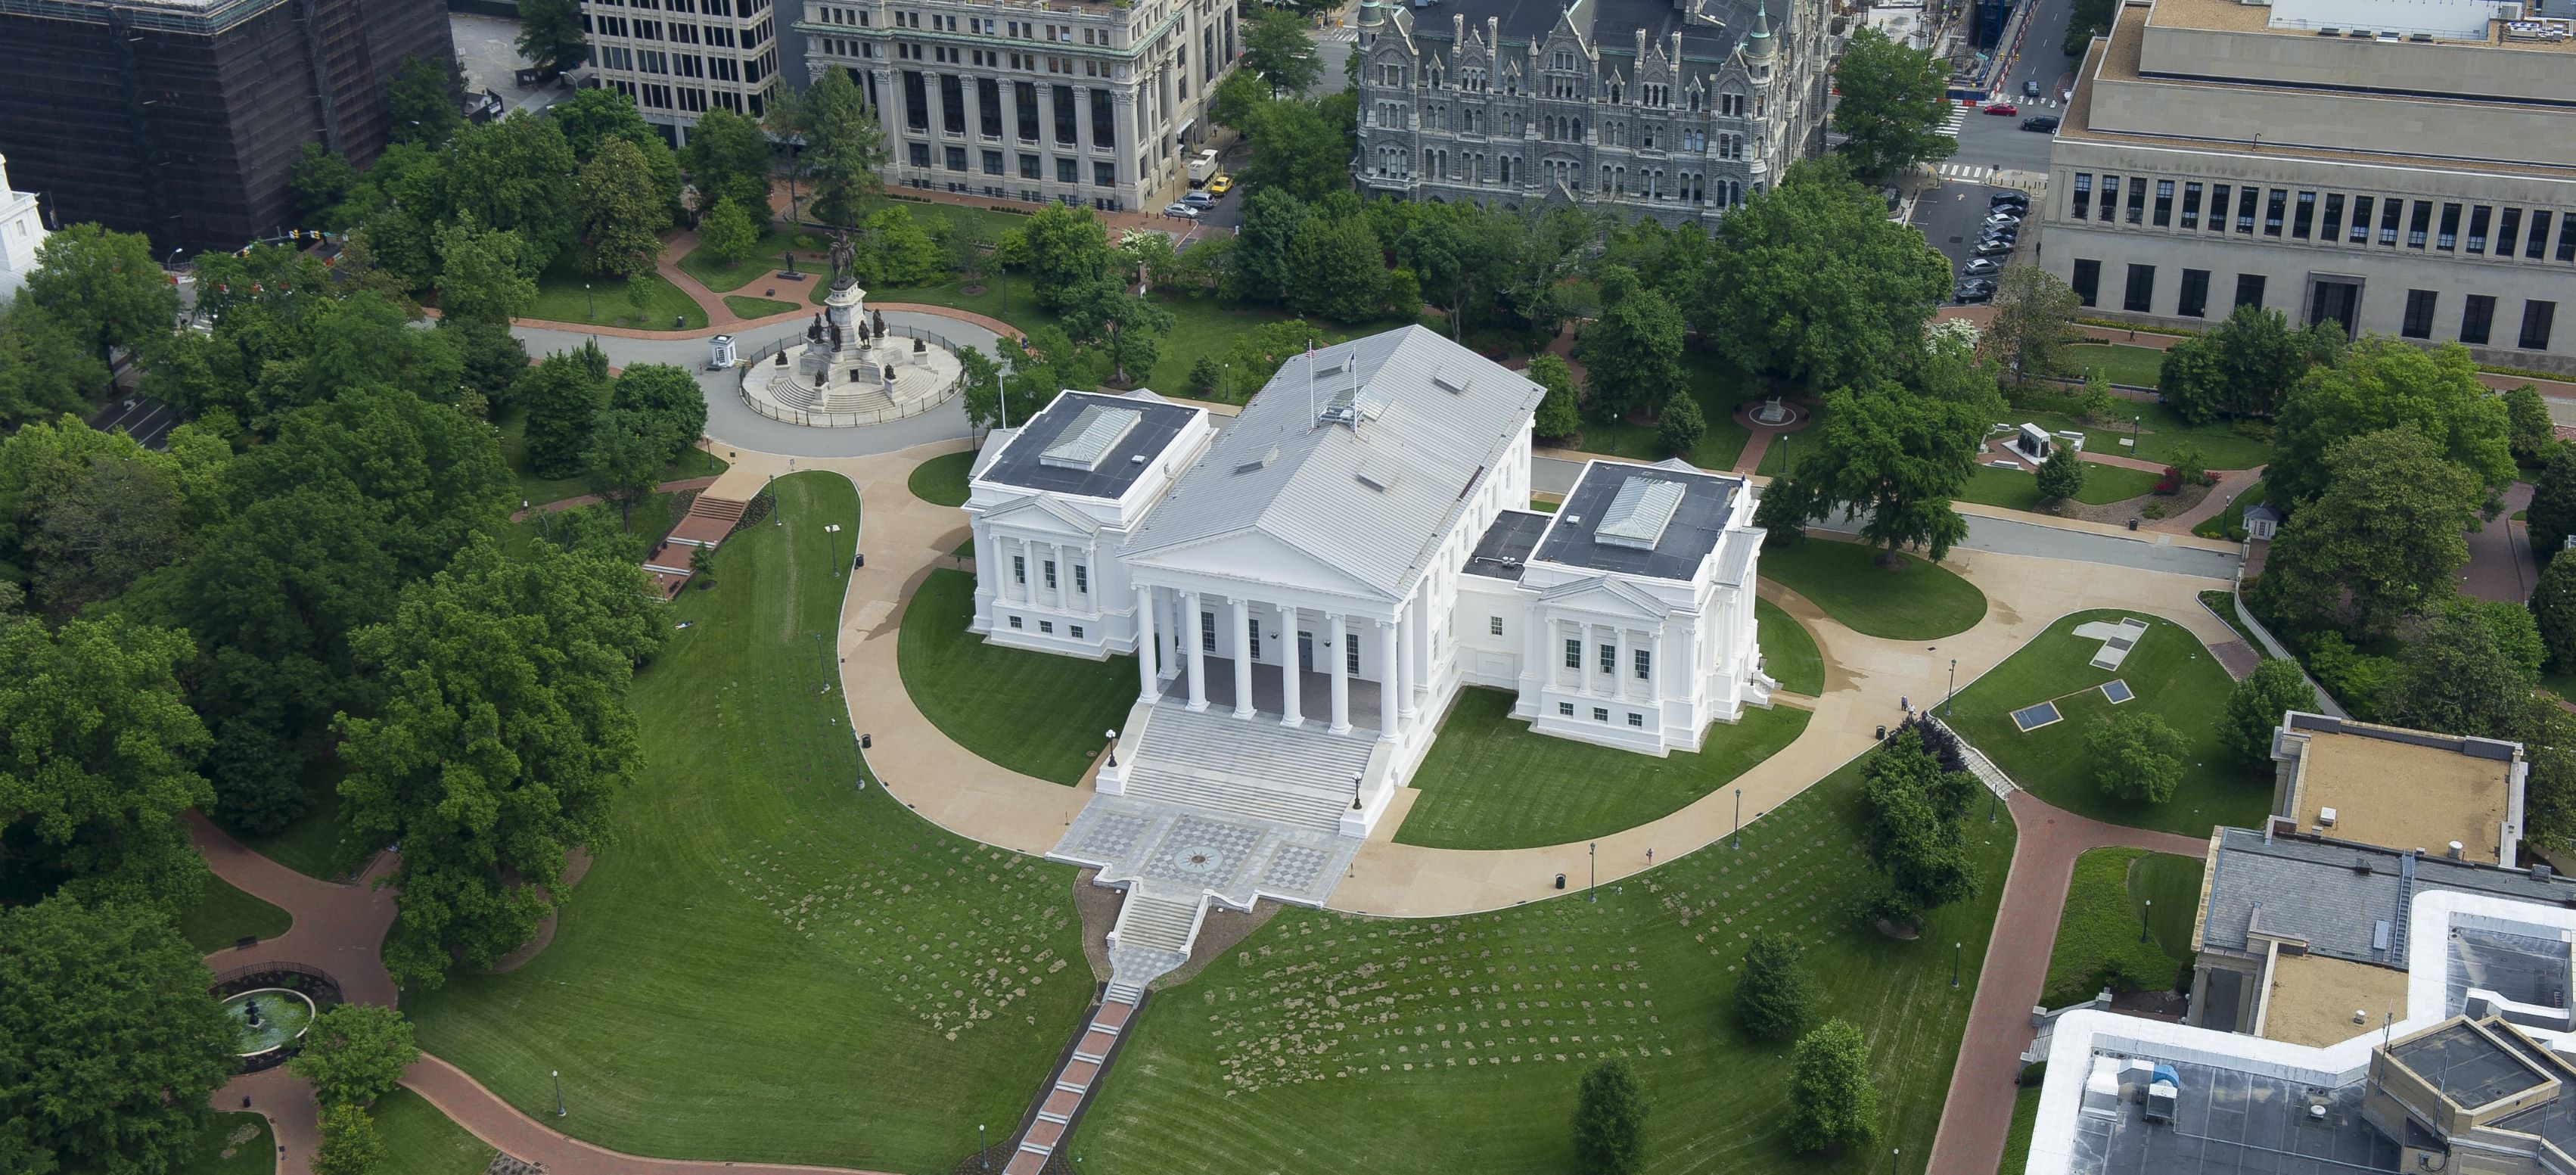 Aerial image of the Richmond capitol building